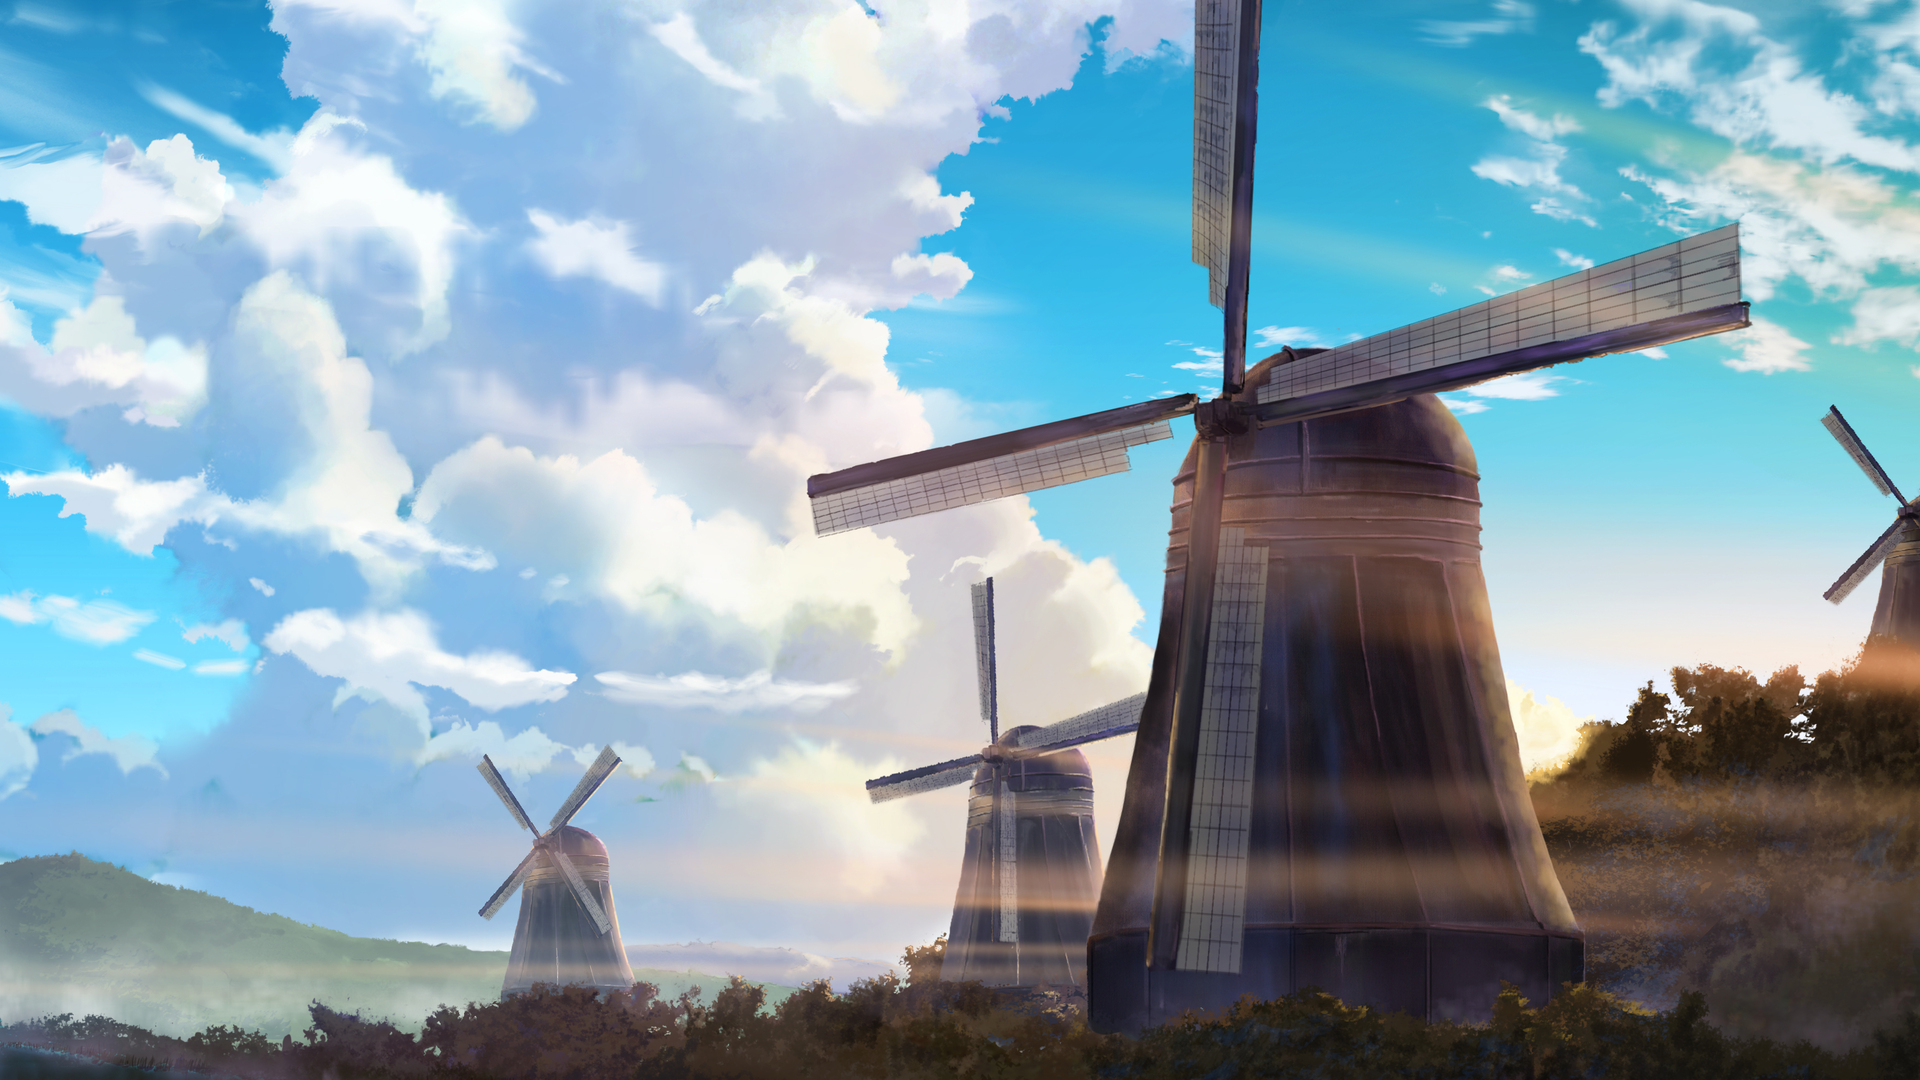 Windmill Anime Scenery 4k Laptop Full HD 1080P HD 4k Wallpaper, Image, Background, Photo and Picture